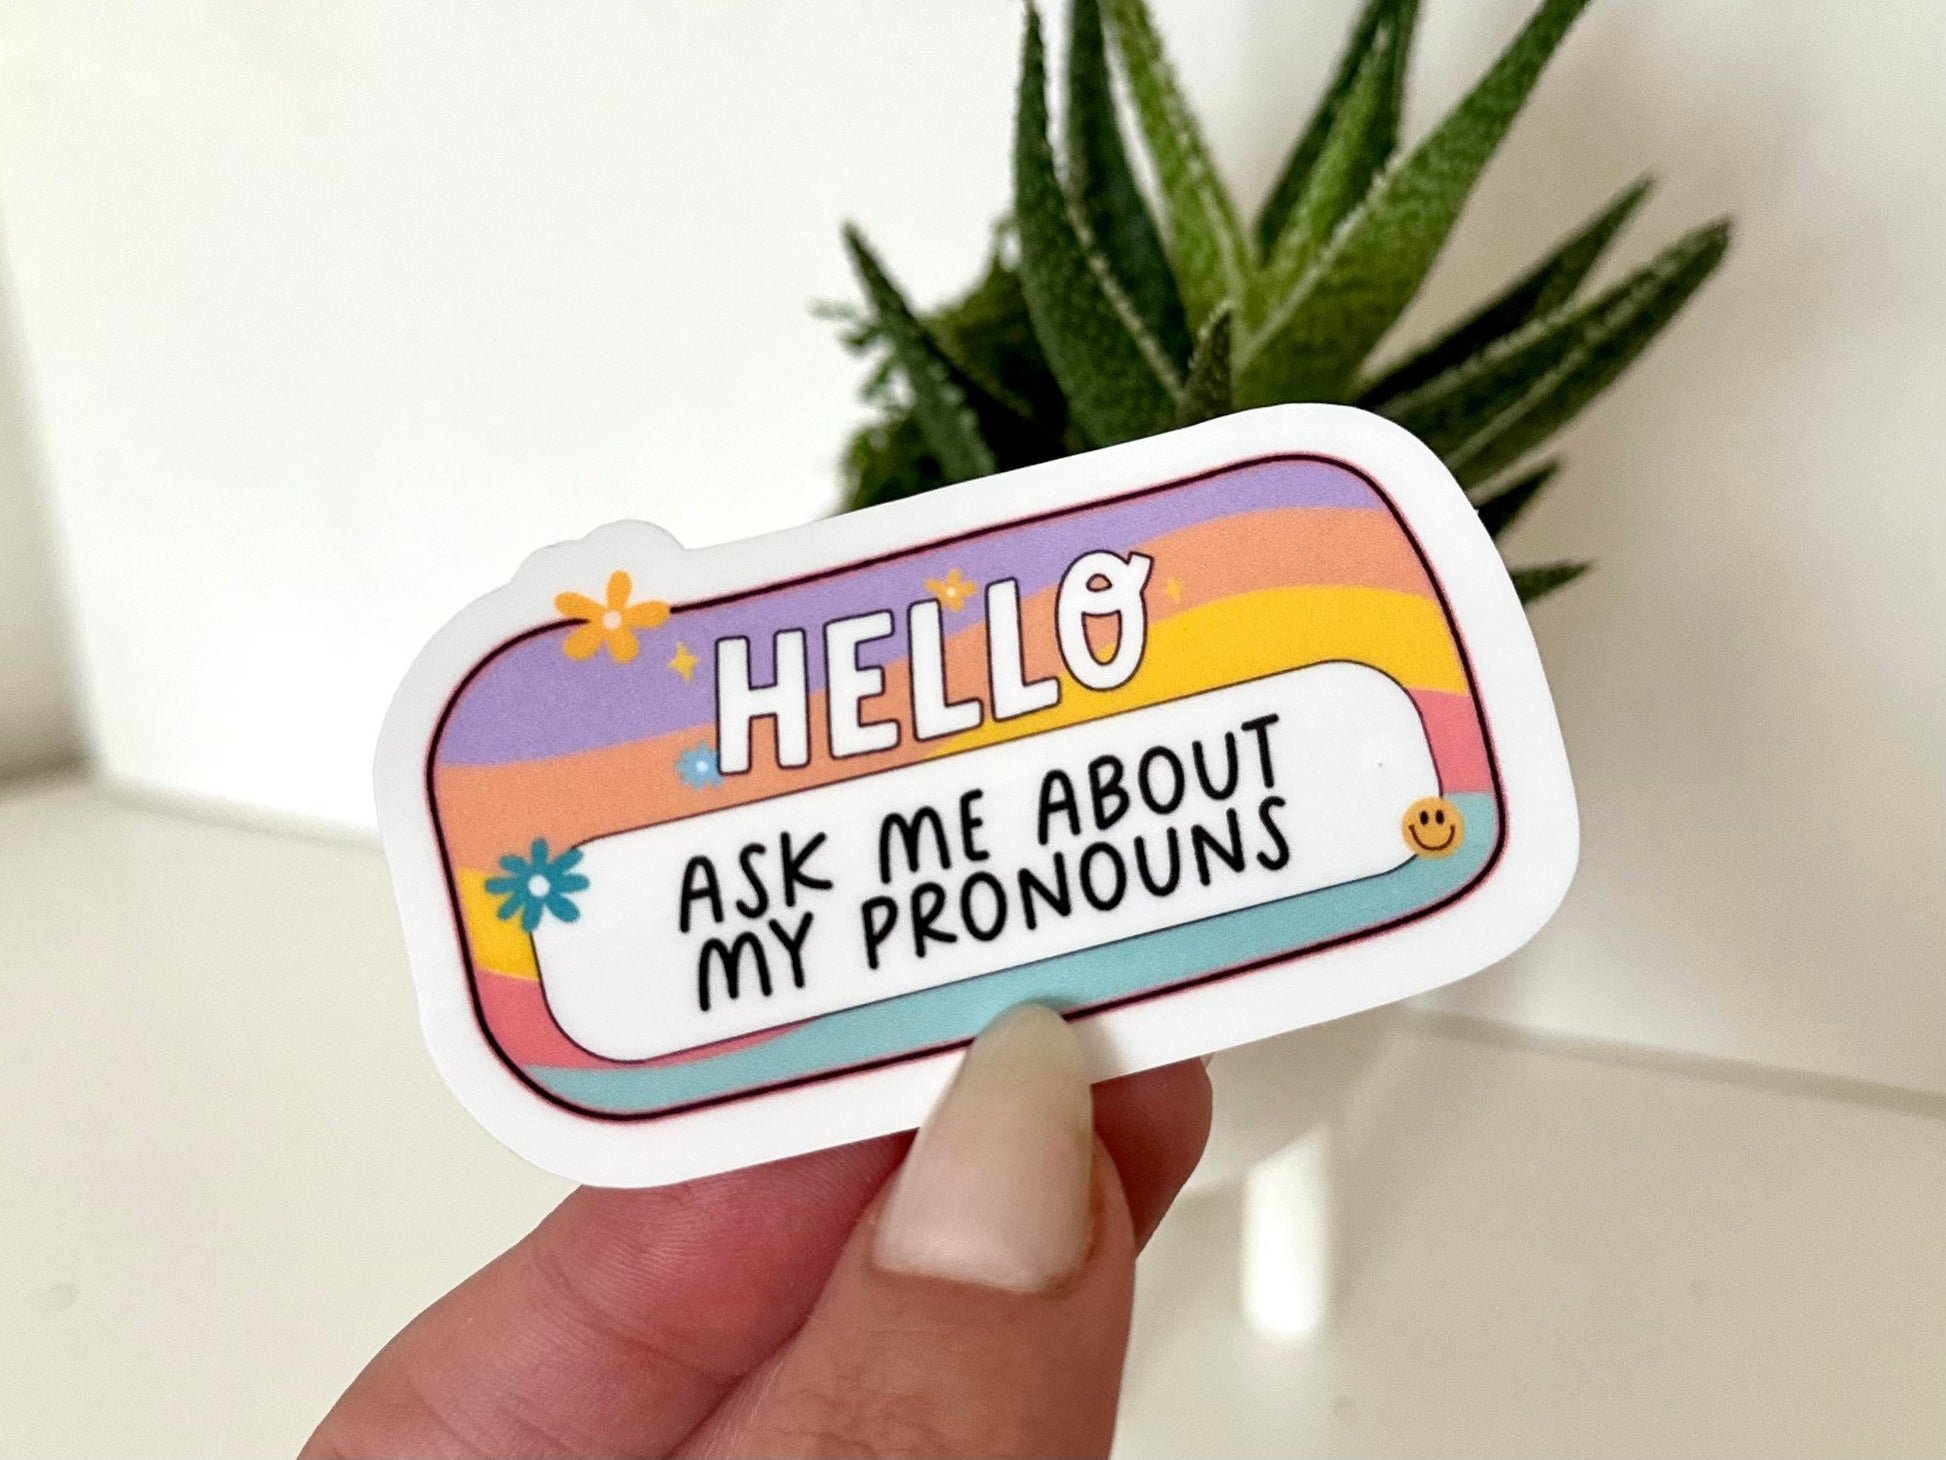 Hello, Ask Me About My Pronouns Waterproof Sticker, Name Tag, Pronoun Tags, LGBTQ Stickers, Pride Gifts, Trans Friendly